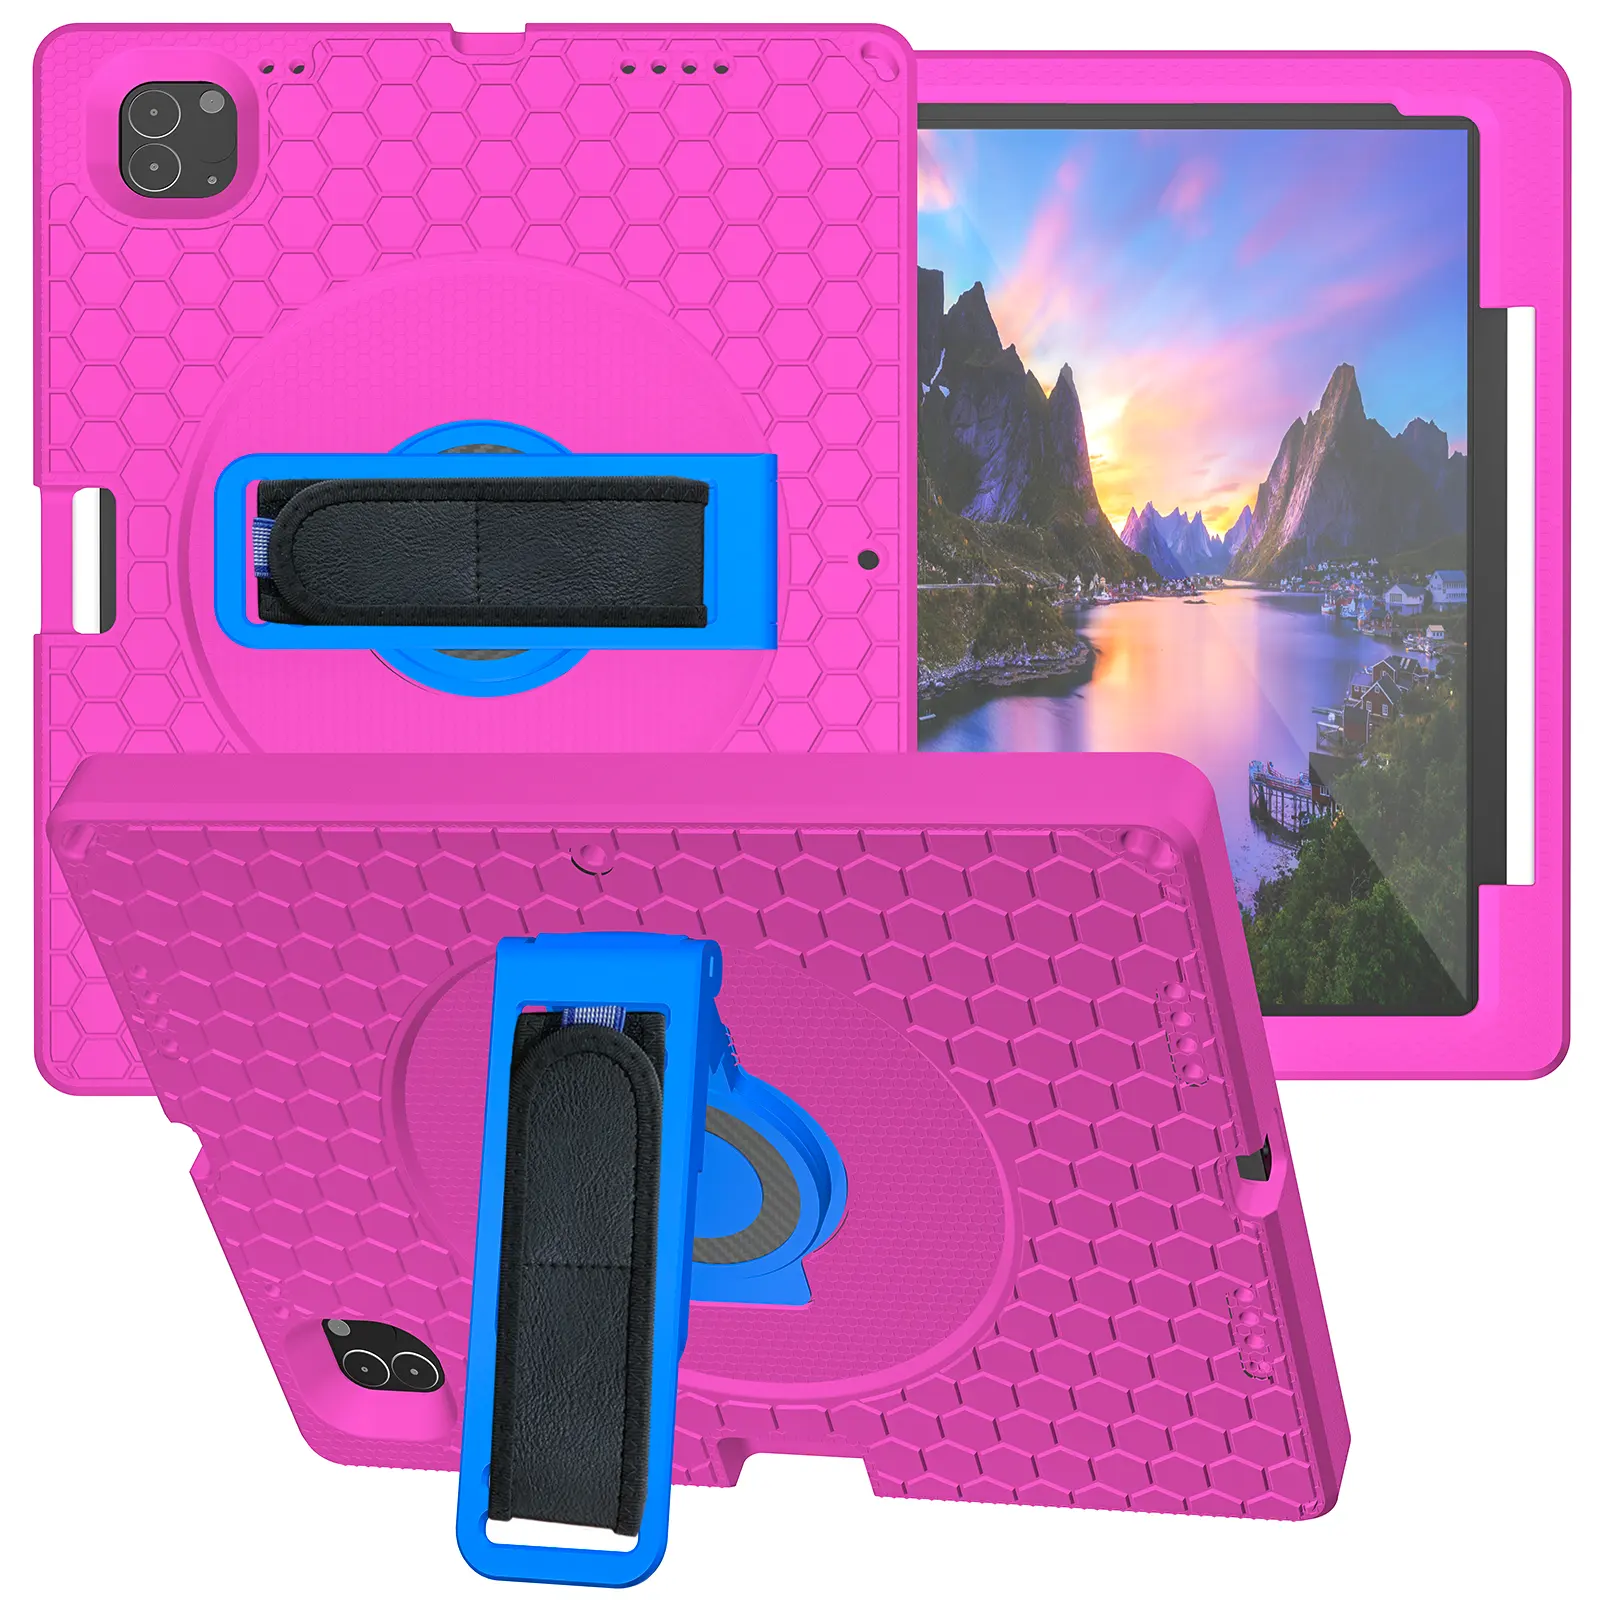 360 Rotating Shockproof Armor Heavy Duty Rugged Protective Tablet Case Cover For Ipad 10.2 Mini Air 4 5 6 Pro 9.7 11 12.9 Inch